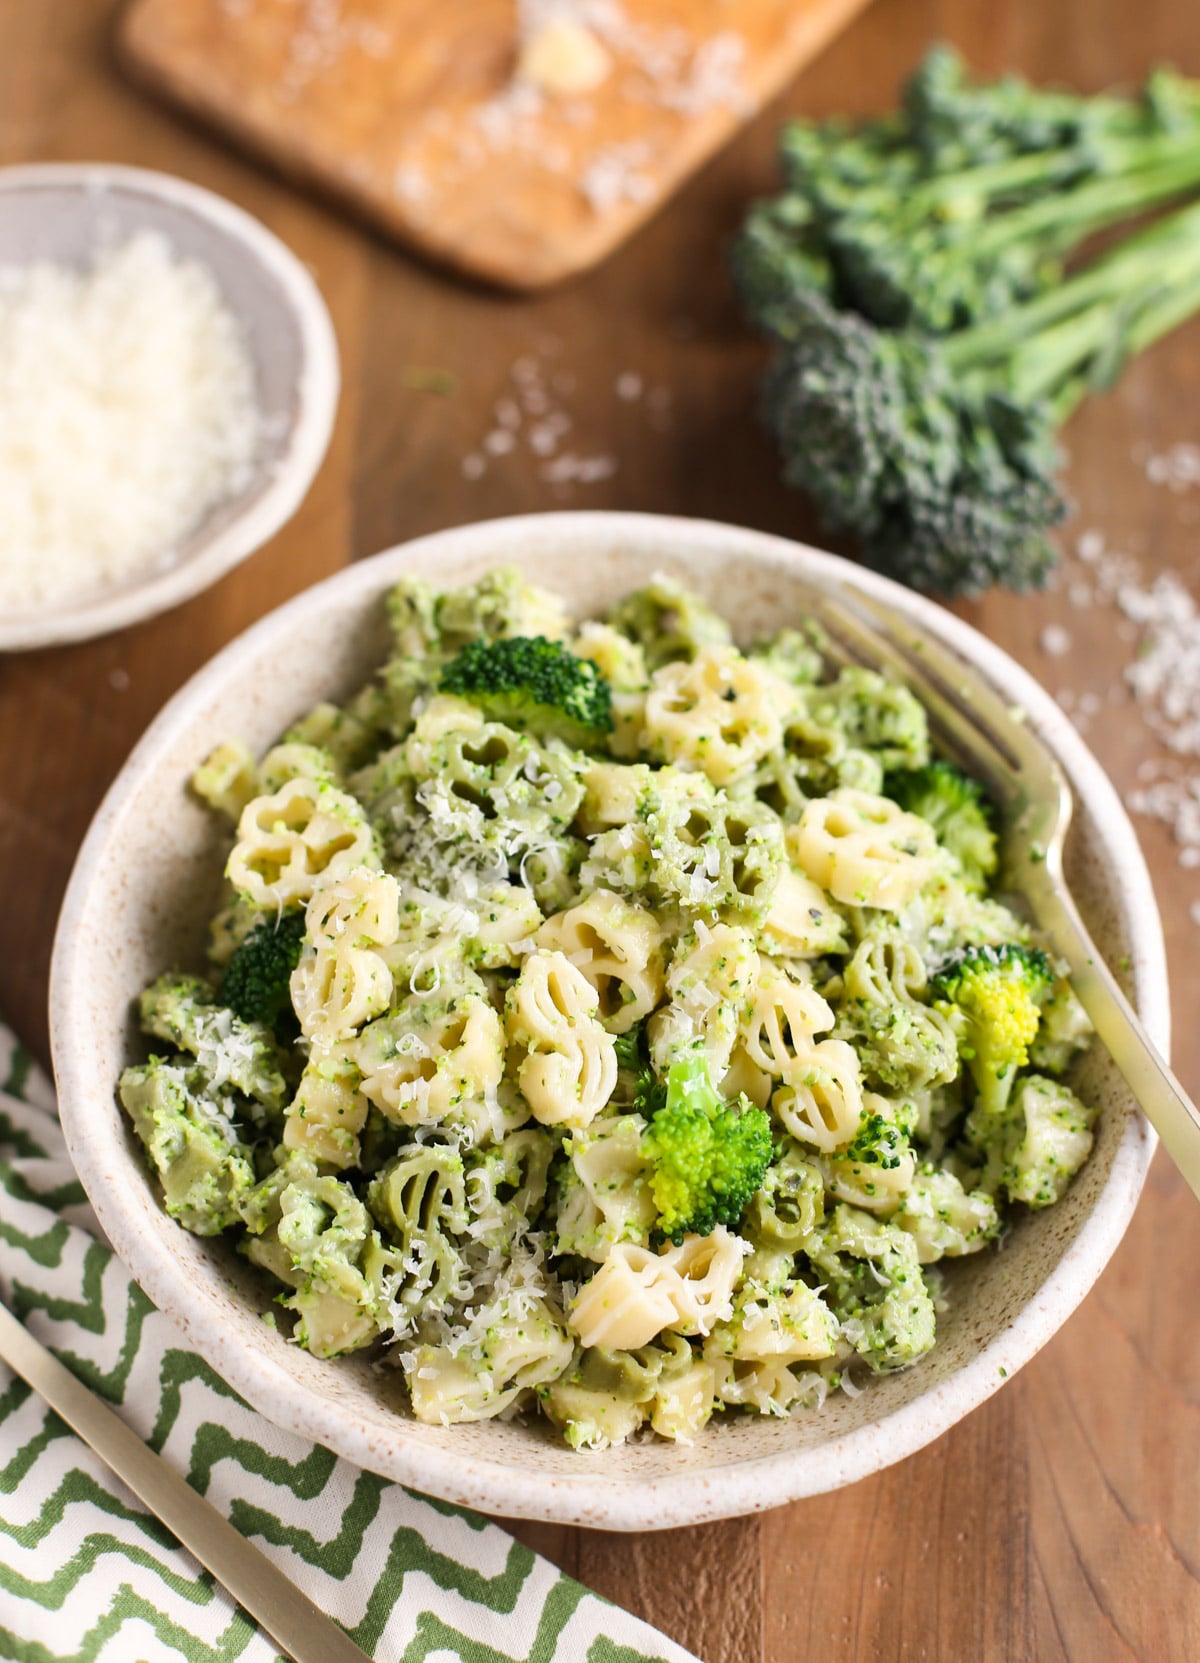 Small natural bowl of pasta showing dollar sign pasta shape with fresh broccolini in background